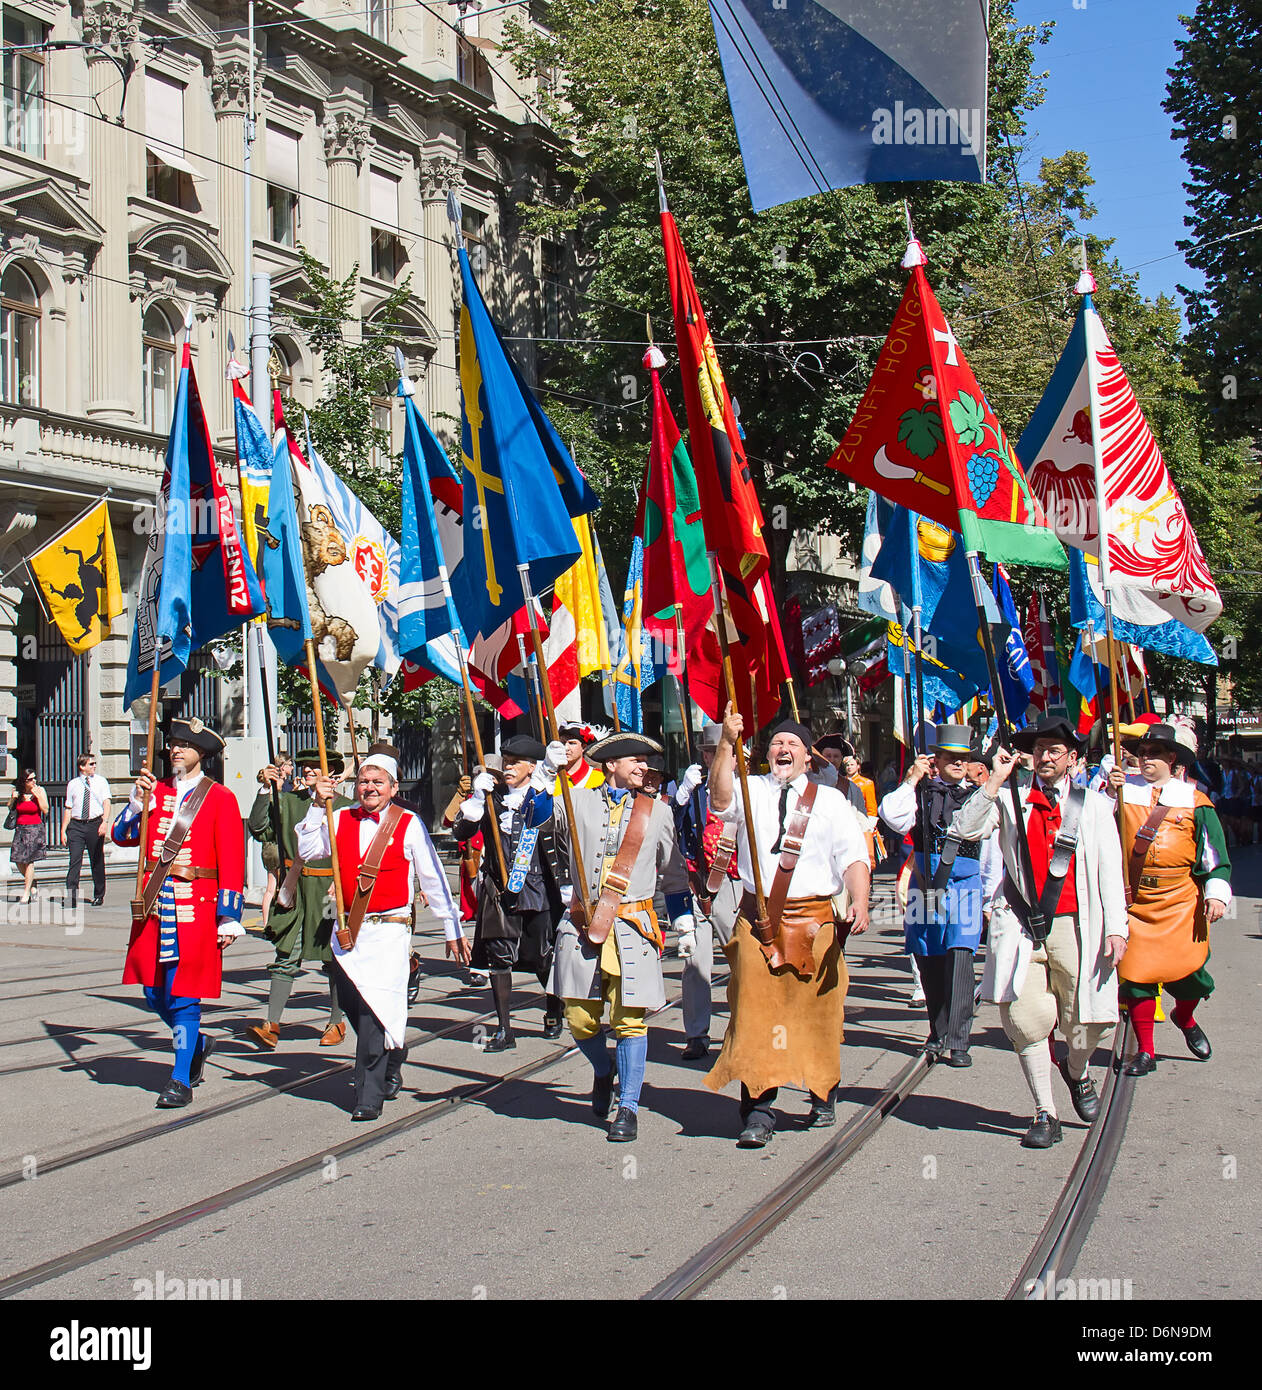 ZURICH - AUGUST 1: Swiss National Day parade on August 1, 2012 in Zurich, Switzerland. Representatives of professional guilds of city Zürich in a historical costumes taking part in parade. Stock Photo